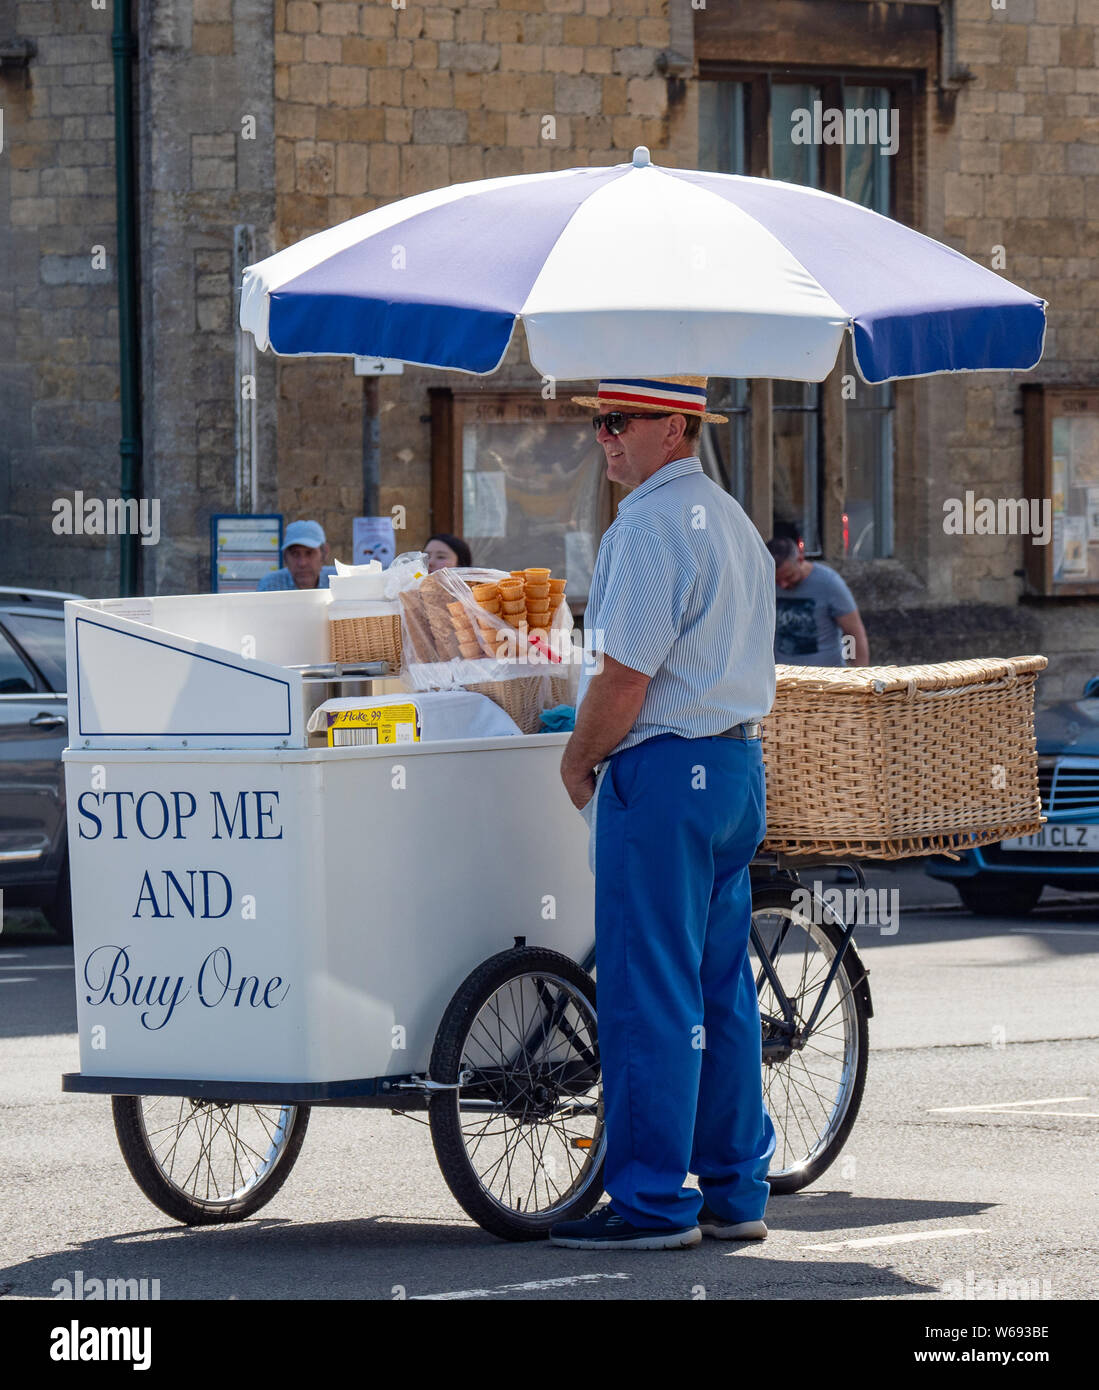 Stop me and buy one - An Ice Cream seller in Stow on the Wold, Gloucestershire, England, UK. Stock Photo